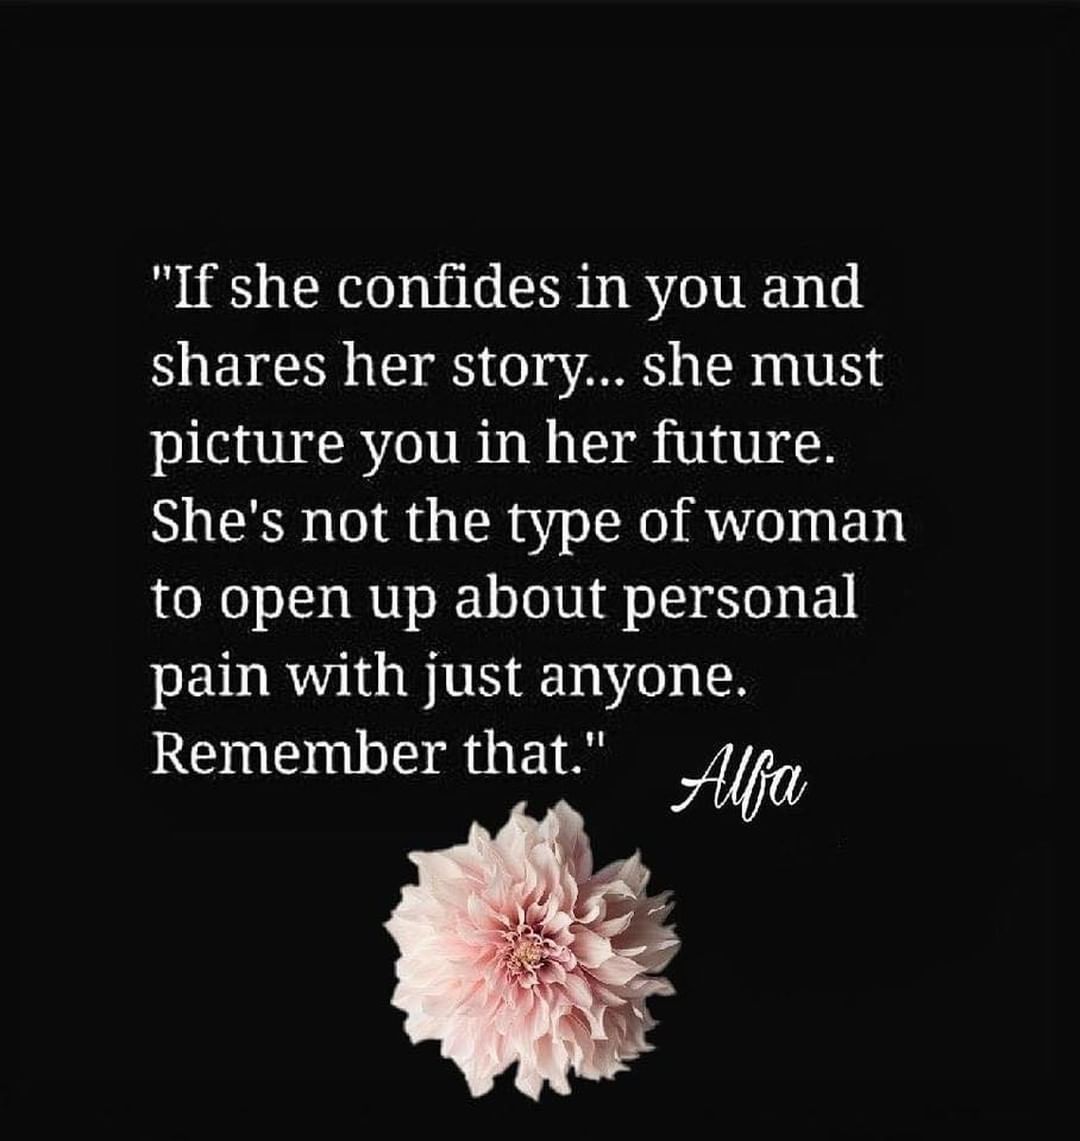 If she confides in you and shares her story... she must picture you in her future. She's not the type of woman to open up about personal pain with just anyone. Remember that.